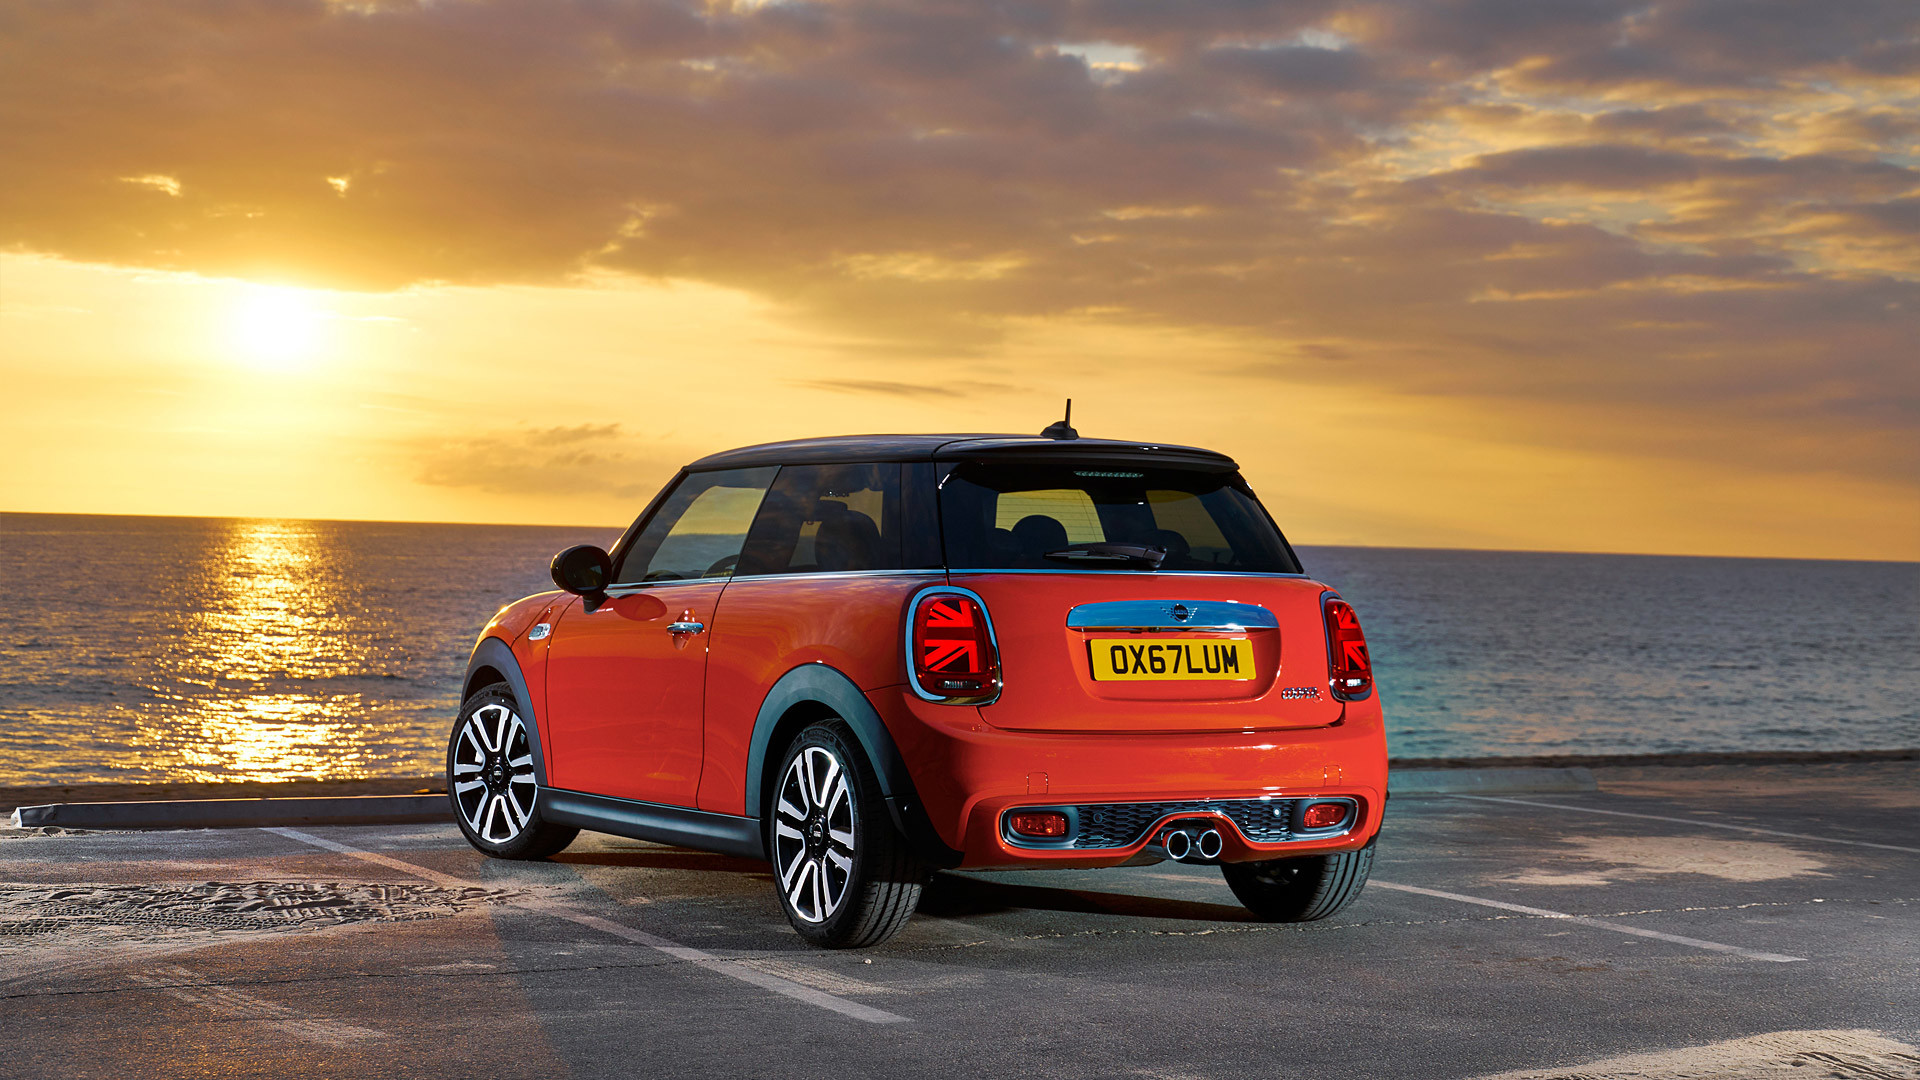 1920x1080 2018 Mini Cooper S at Sunset by the Sea HD Wallpaper | Hintergrund |   | ID:906021 - Wallpaper Abyss